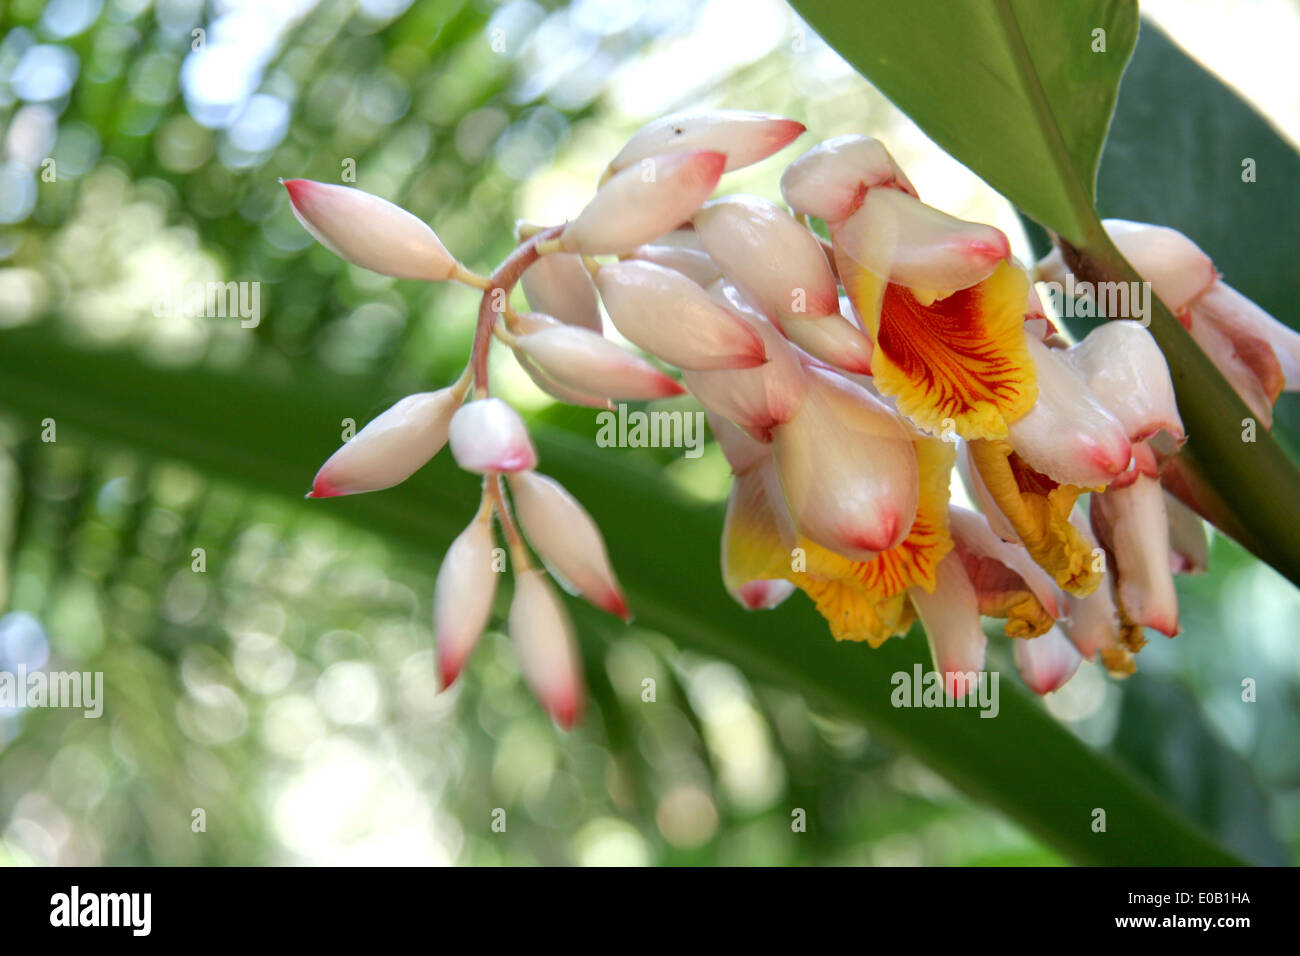 Alpinia zerumbet, commonly known as shell ginger. A white flower with yellow interior & pink tips on the buds. Stock Photo